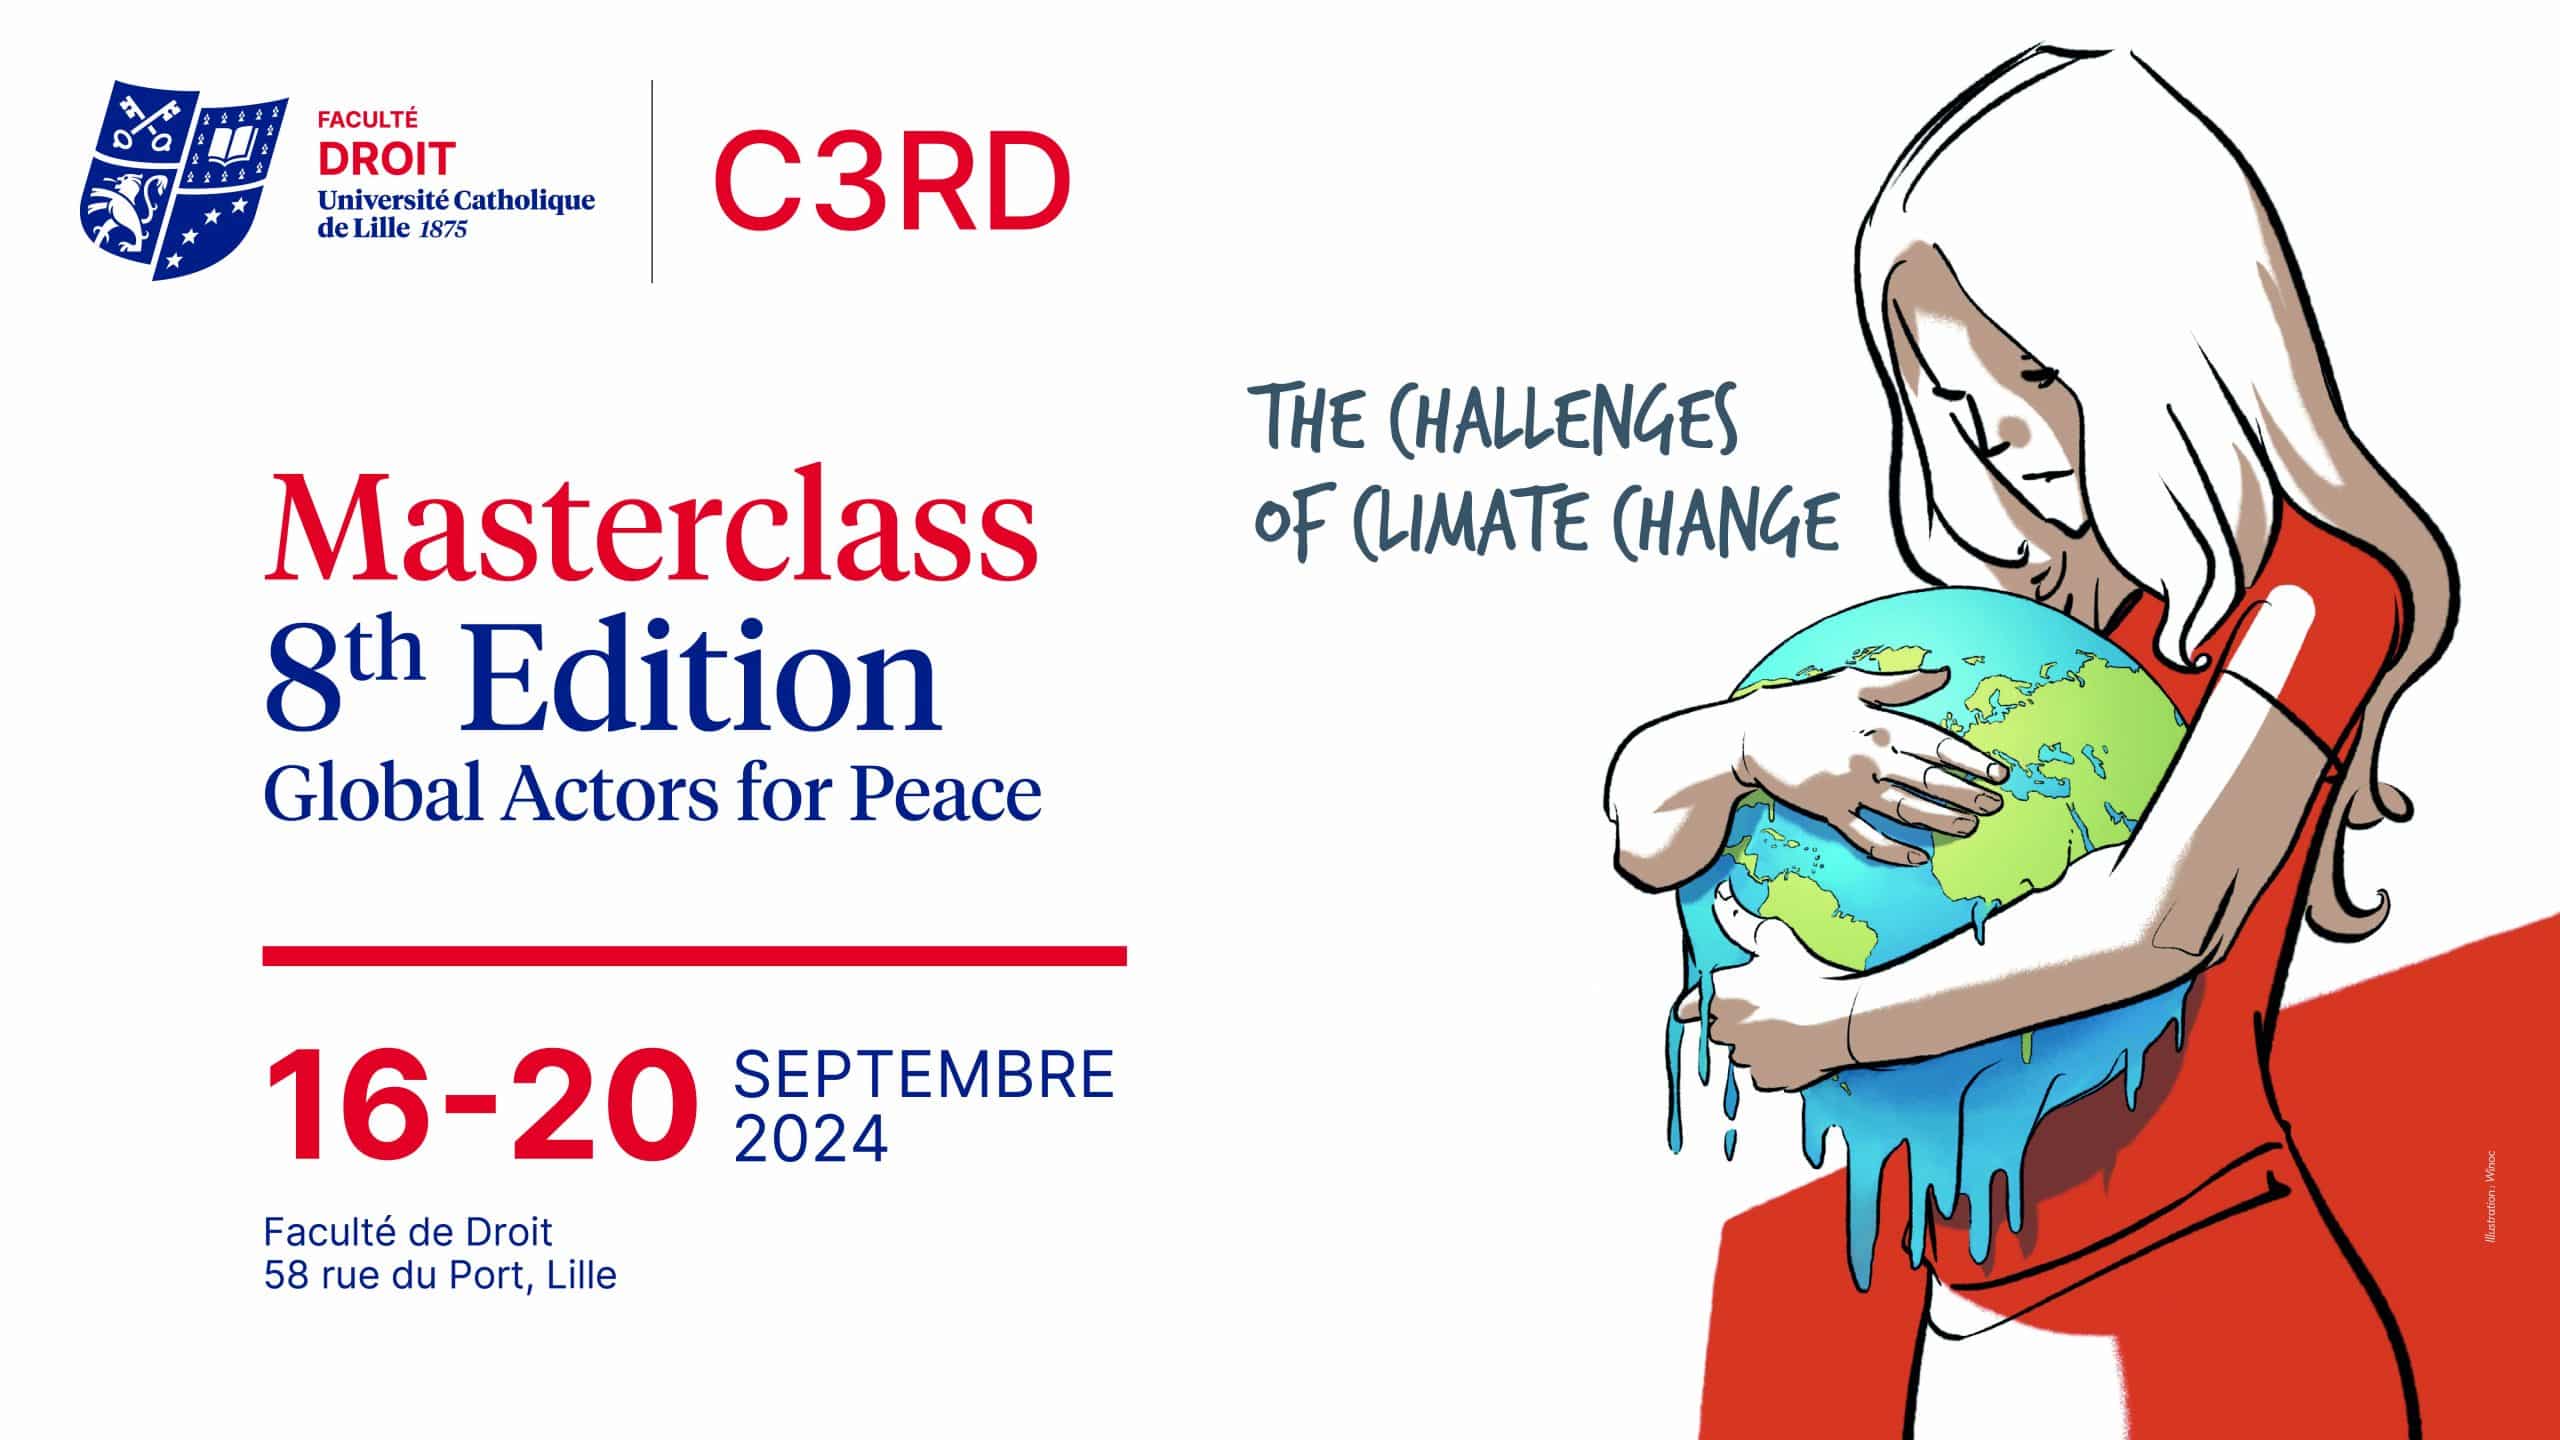 Masterclass 2024 – Global Actors for Peace: an 8th edition dedicated to the challenges of climate change